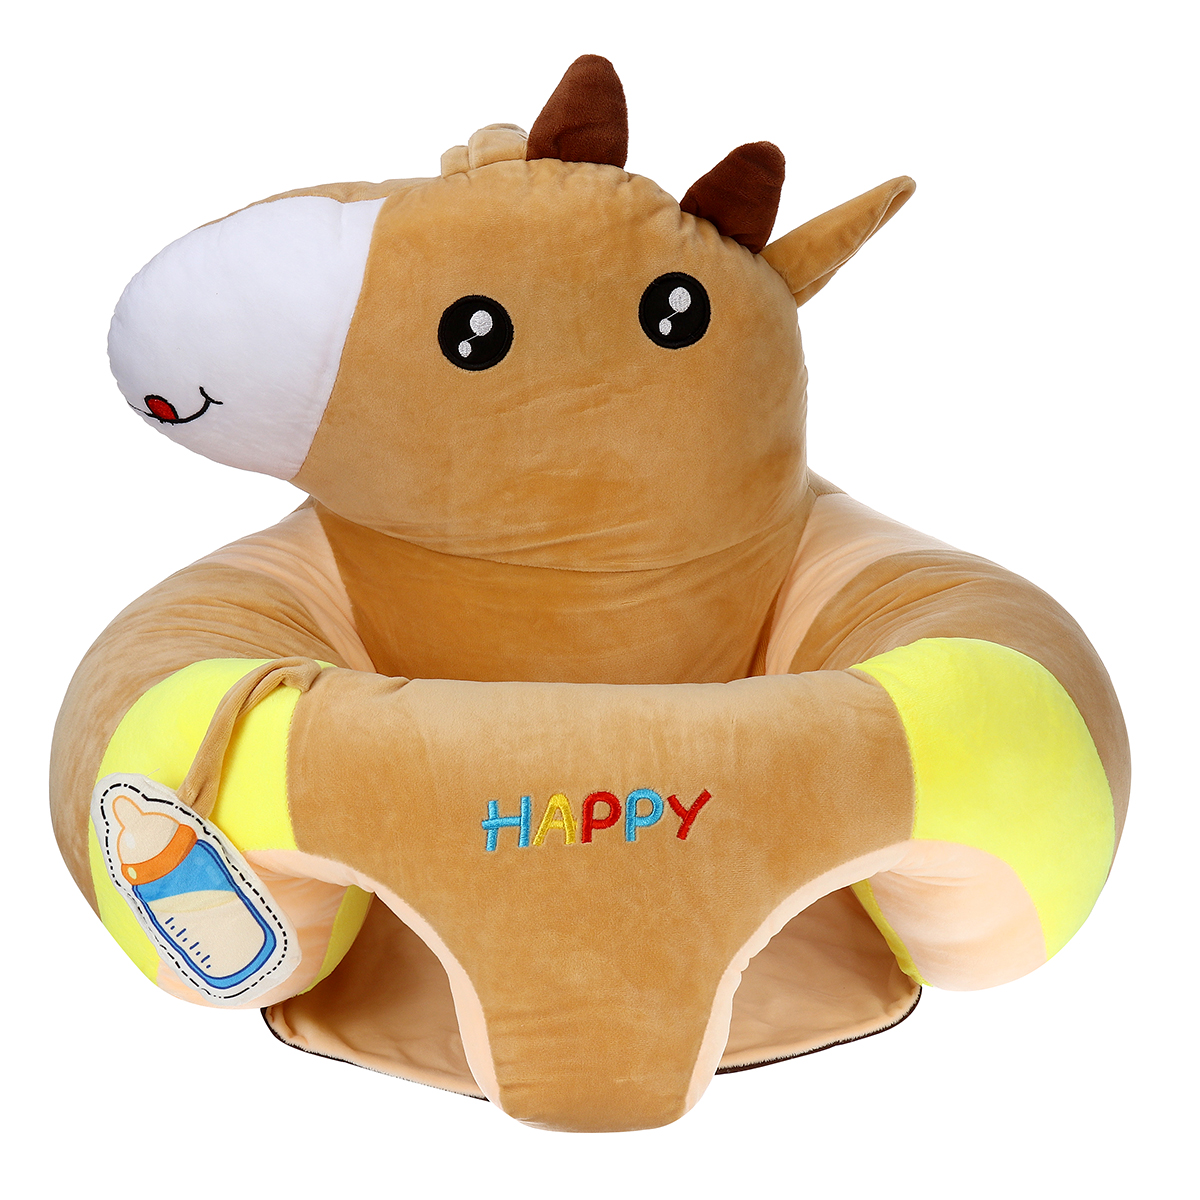 Multi-Style-Kids-Baby-Support-Seats-Sit-Up-Soft-Chair-Sofa-Cartoon-Animal-Kids-Learning-To-Sit-Plush-1817560-5